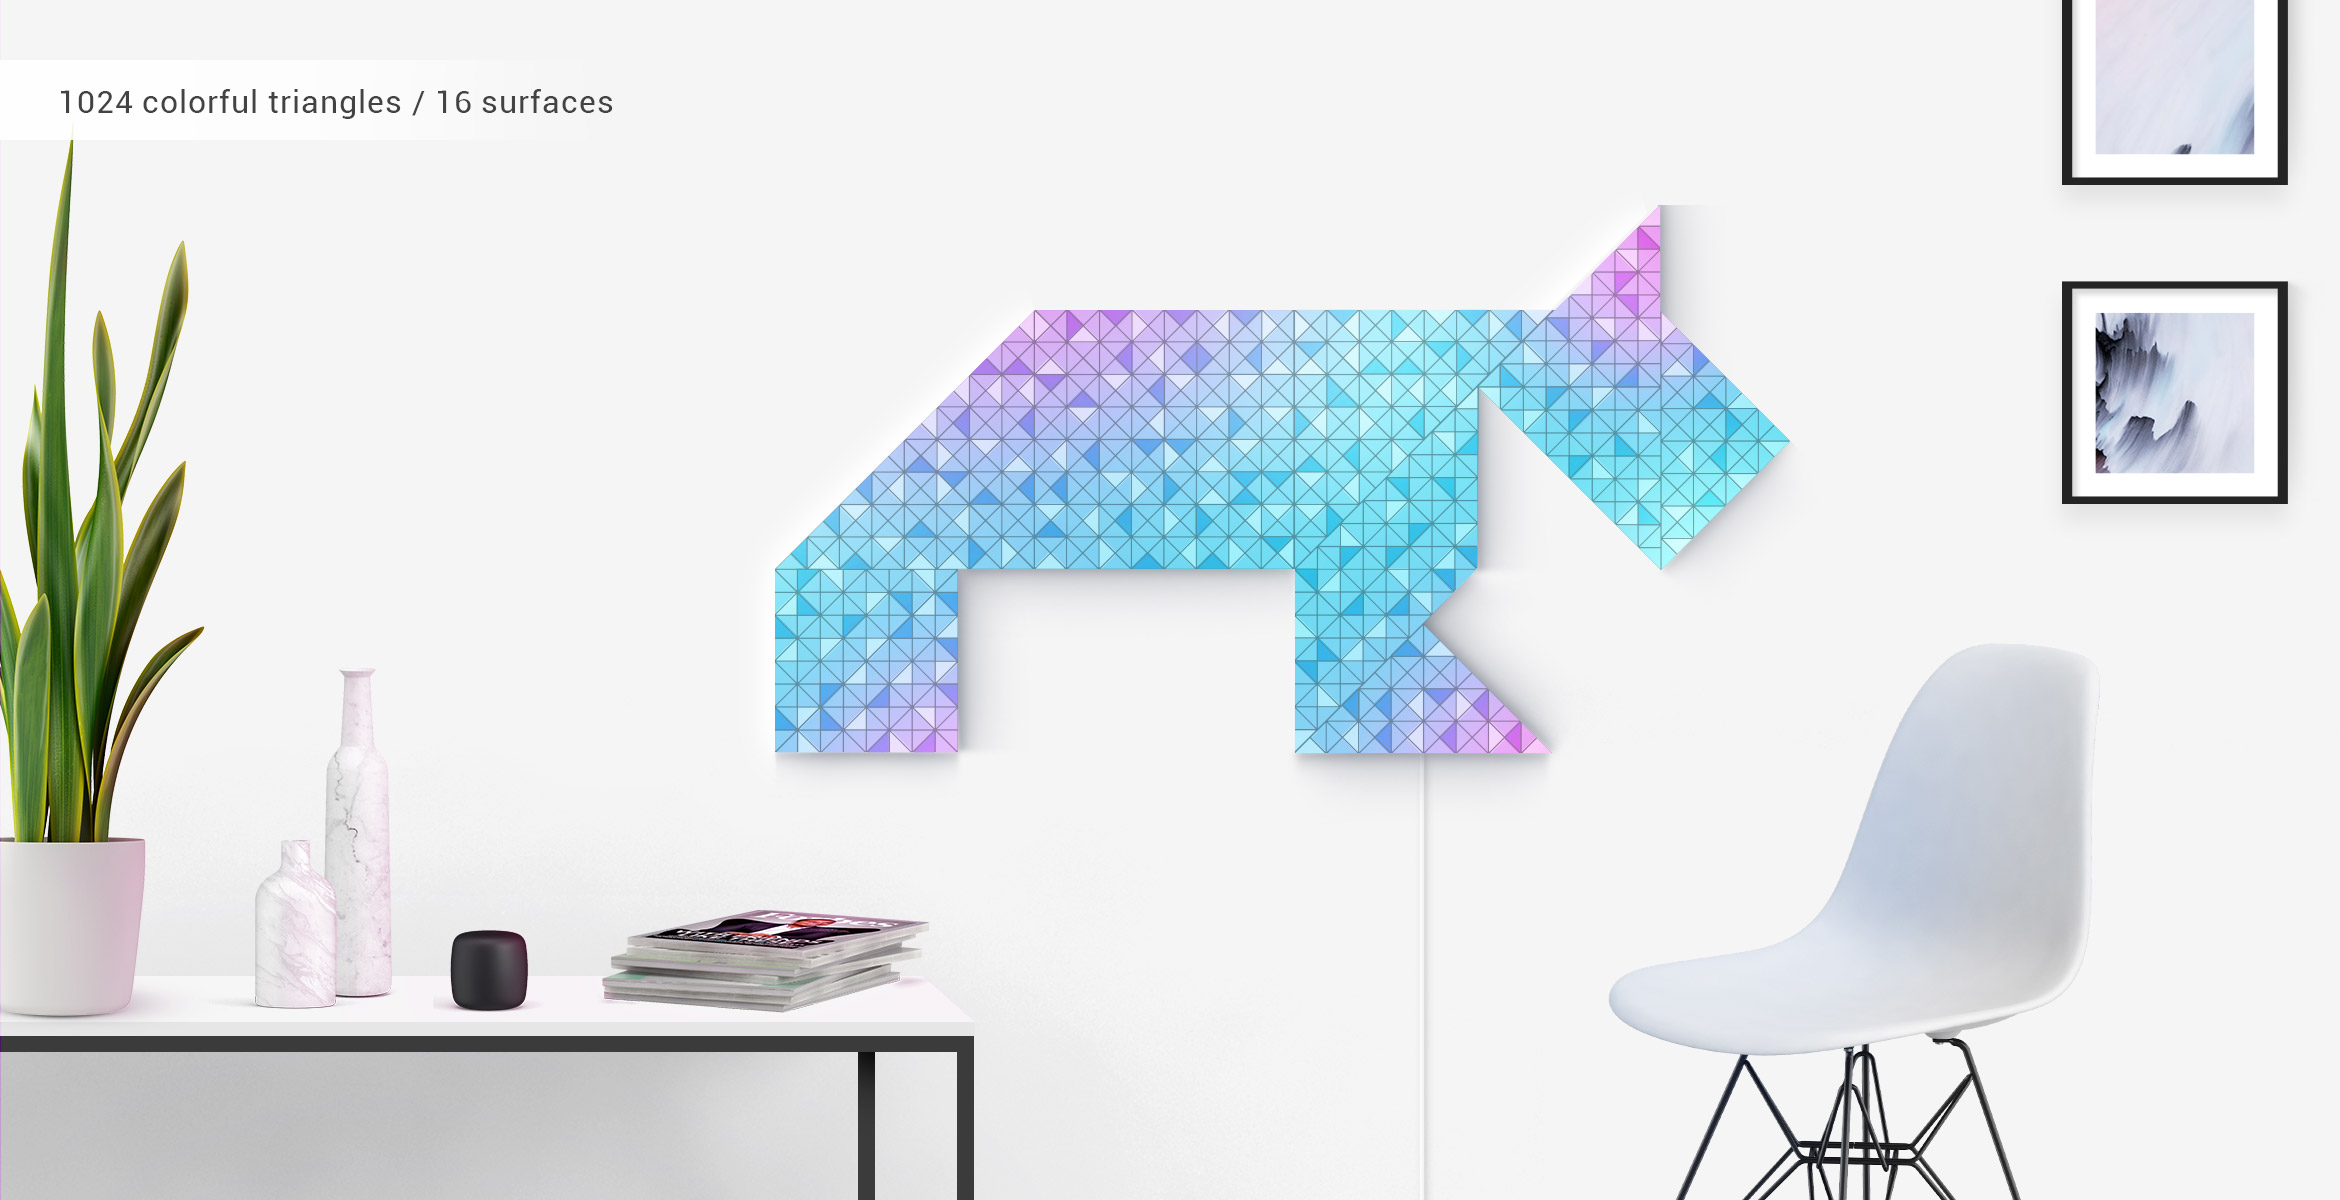 Dog shape, assembled from 12 LaMetric SKY smart light surfaces, in impressive Tangram art style, complements the room interior